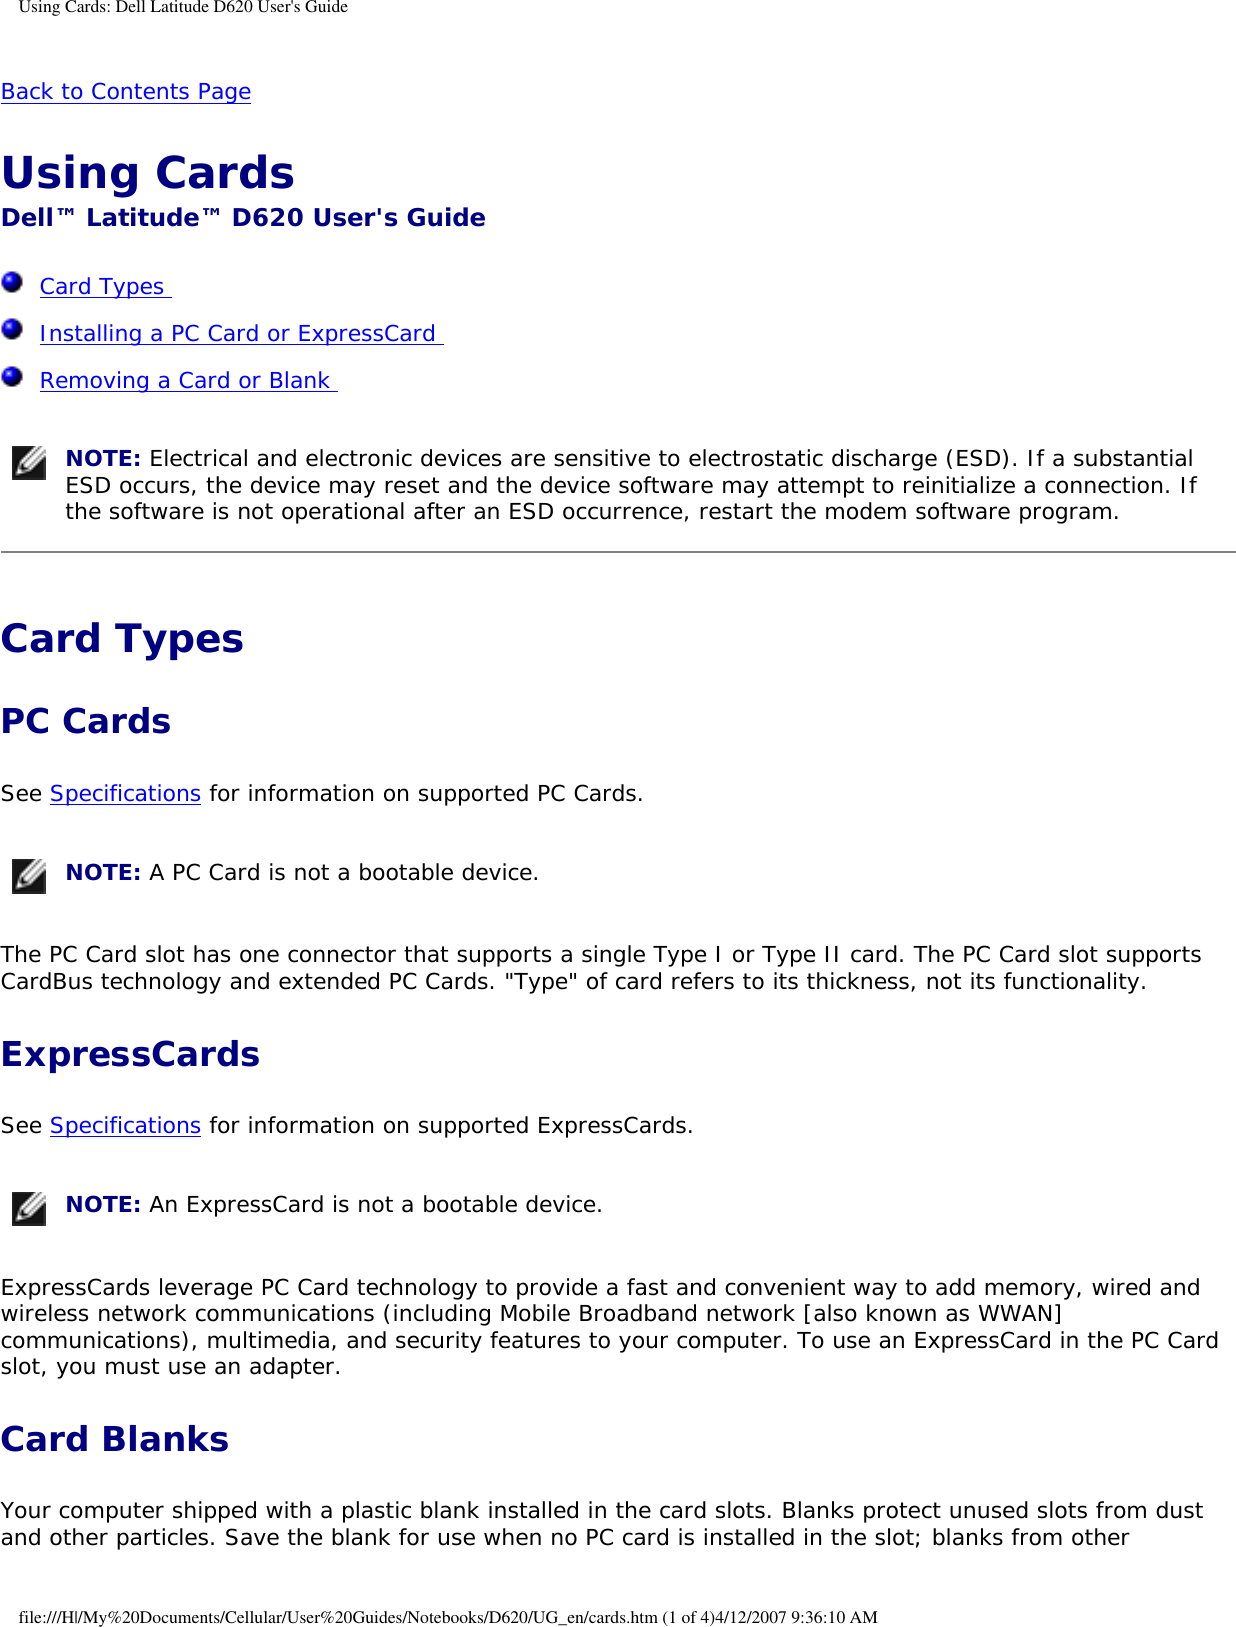 Using Cards: Dell Latitude D620 User&apos;s GuideBack to Contents Page Using Cards Dell™ Latitude™ D620 User&apos;s Guide  Card Types   Installing a PC Card or ExpressCard   Removing a Card or Blank   NOTE: Electrical and electronic devices are sensitive to electrostatic discharge (ESD). If a substantial ESD occurs, the device may reset and the device software may attempt to reinitialize a connection. If the software is not operational after an ESD occurrence, restart the modem software program.Card Types PC CardsSee Specifications for information on supported PC Cards. NOTE: A PC Card is not a bootable device.The PC Card slot has one connector that supports a single Type I or Type II card. The PC Card slot supports CardBus technology and extended PC Cards. &quot;Type&quot; of card refers to its thickness, not its functionality.ExpressCards See Specifications for information on supported ExpressCards. NOTE: An ExpressCard is not a bootable device.ExpressCards leverage PC Card technology to provide a fast and convenient way to add memory, wired and wireless network communications (including Mobile Broadband network [also known as WWAN] communications), multimedia, and security features to your computer. To use an ExpressCard in the PC Card slot, you must use an adapter.Card BlanksYour computer shipped with a plastic blank installed in the card slots. Blanks protect unused slots from dust and other particles. Save the blank for use when no PC card is installed in the slot; blanks from other file:///H|/My%20Documents/Cellular/User%20Guides/Notebooks/D620/UG_en/cards.htm (1 of 4)4/12/2007 9:36:10 AM